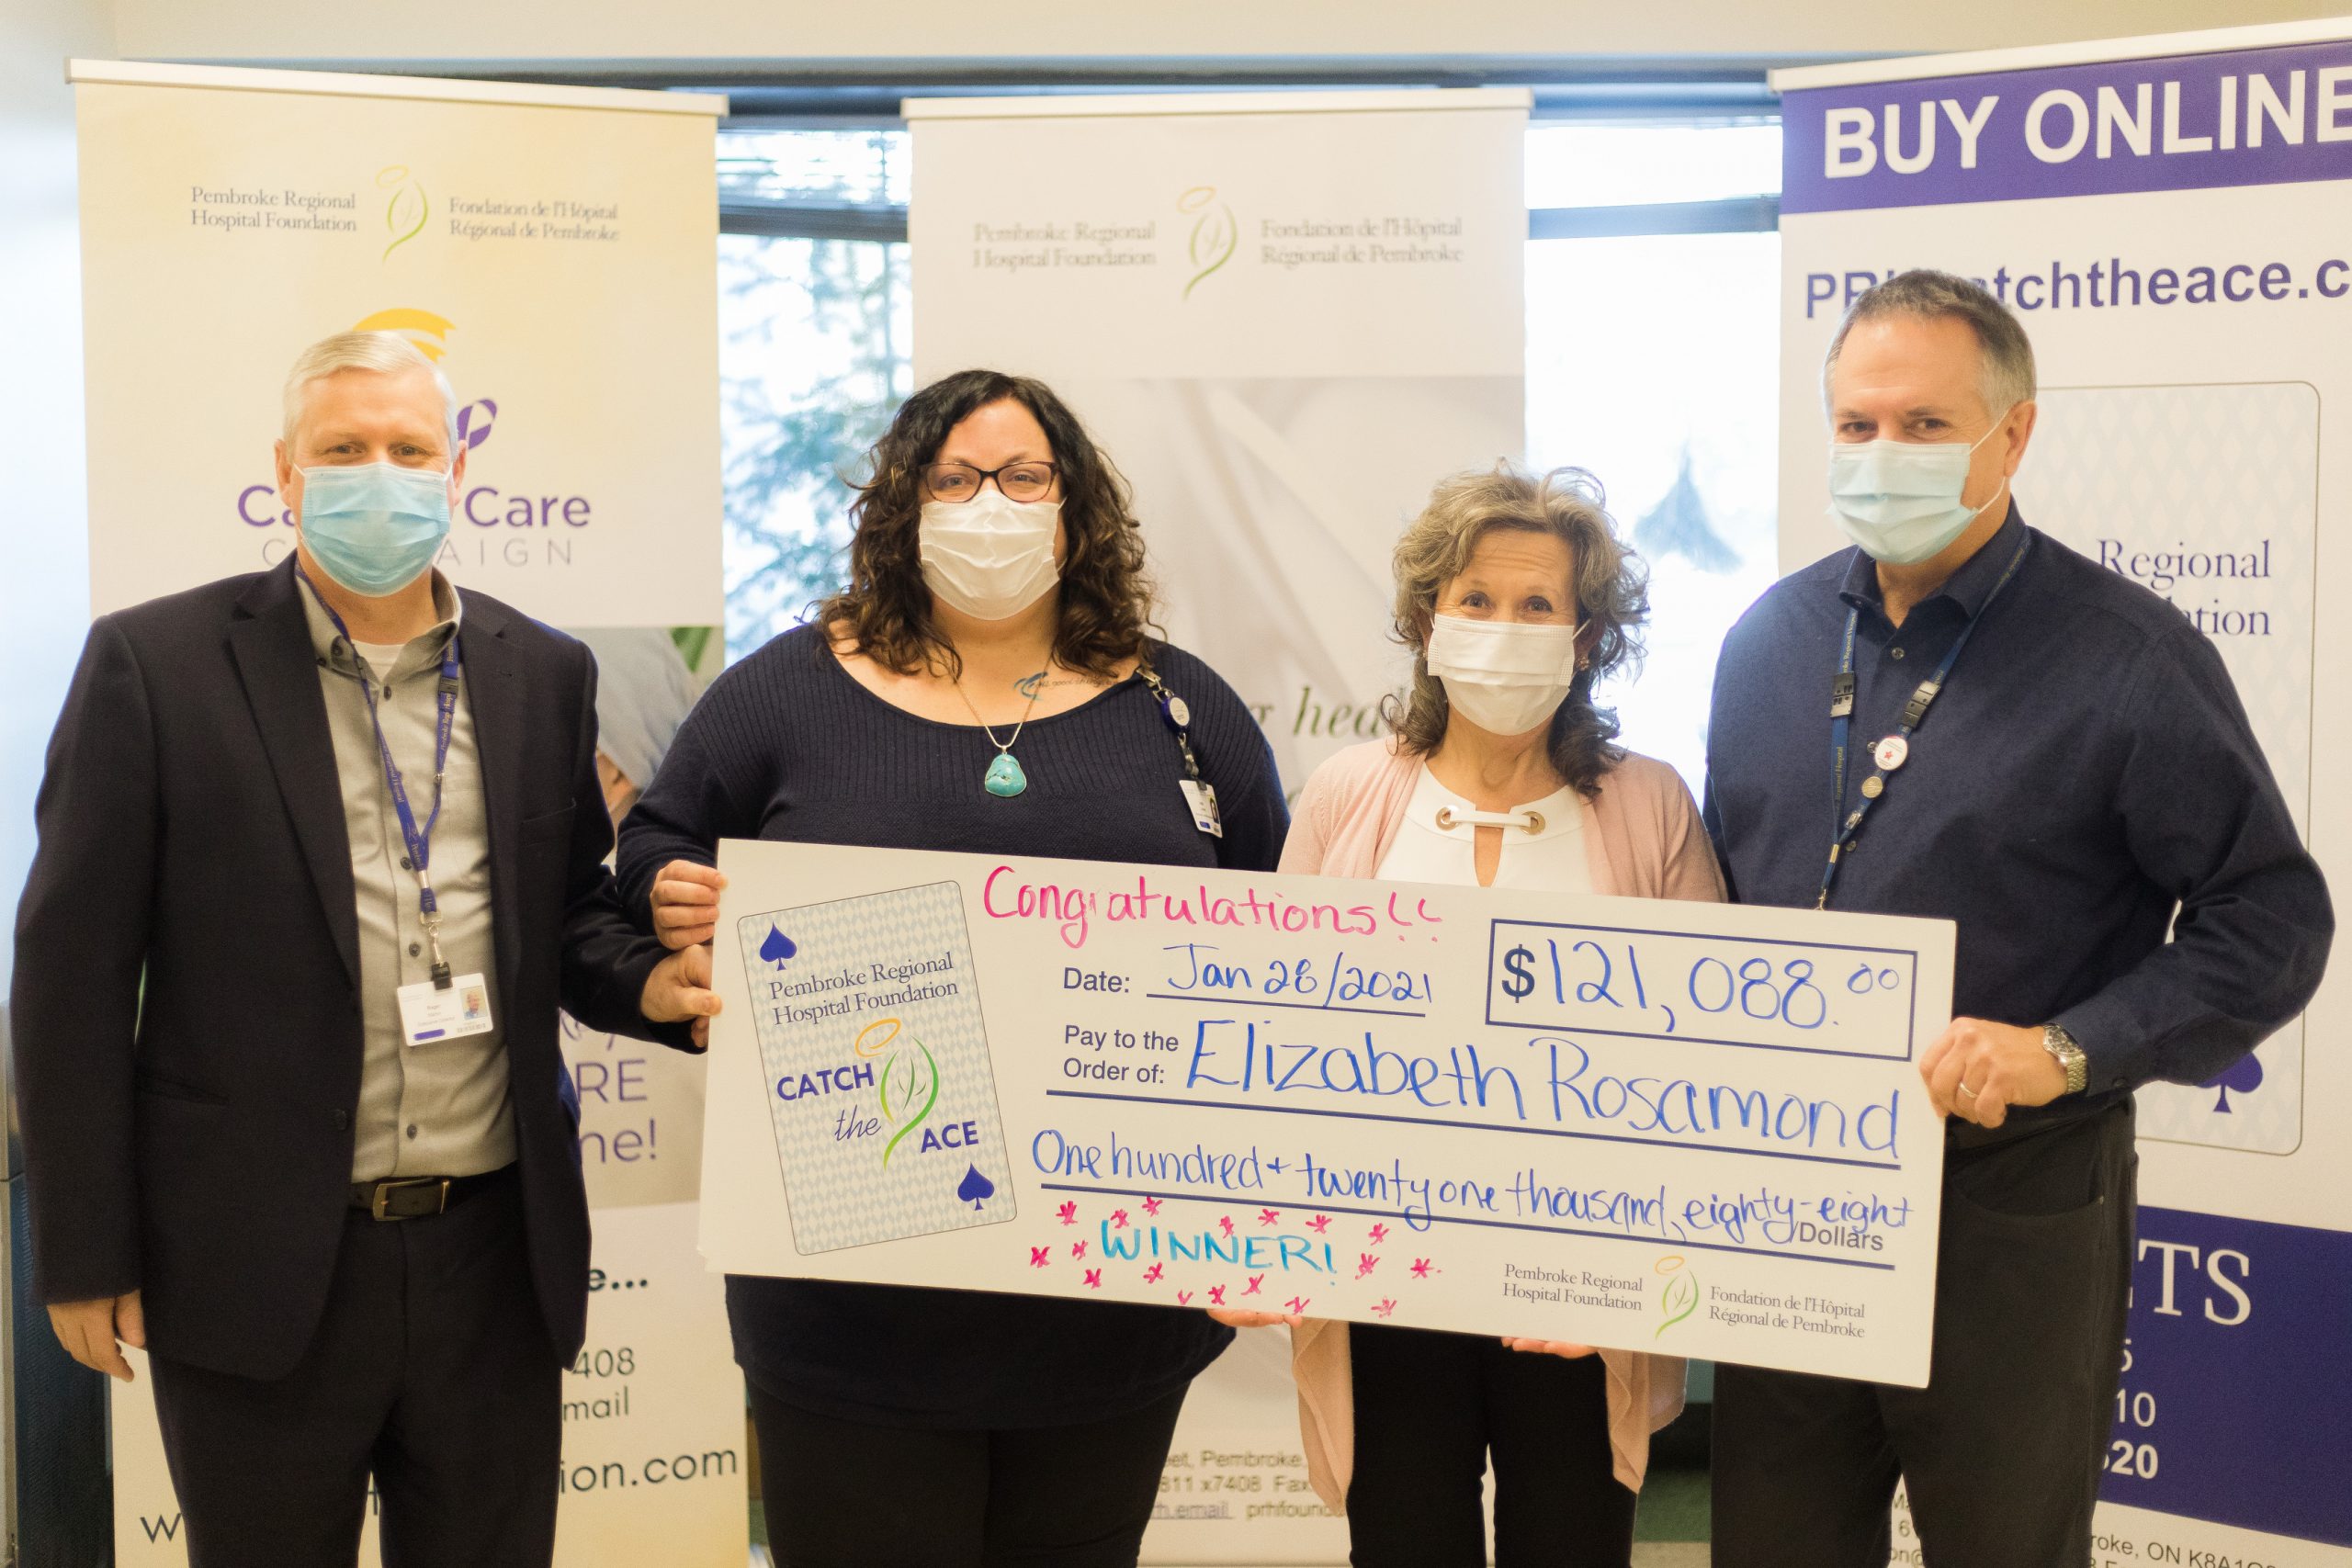 Image showing Catch the Ace Winner receiving her prize at the Pembroke Regional Hospital Foundation